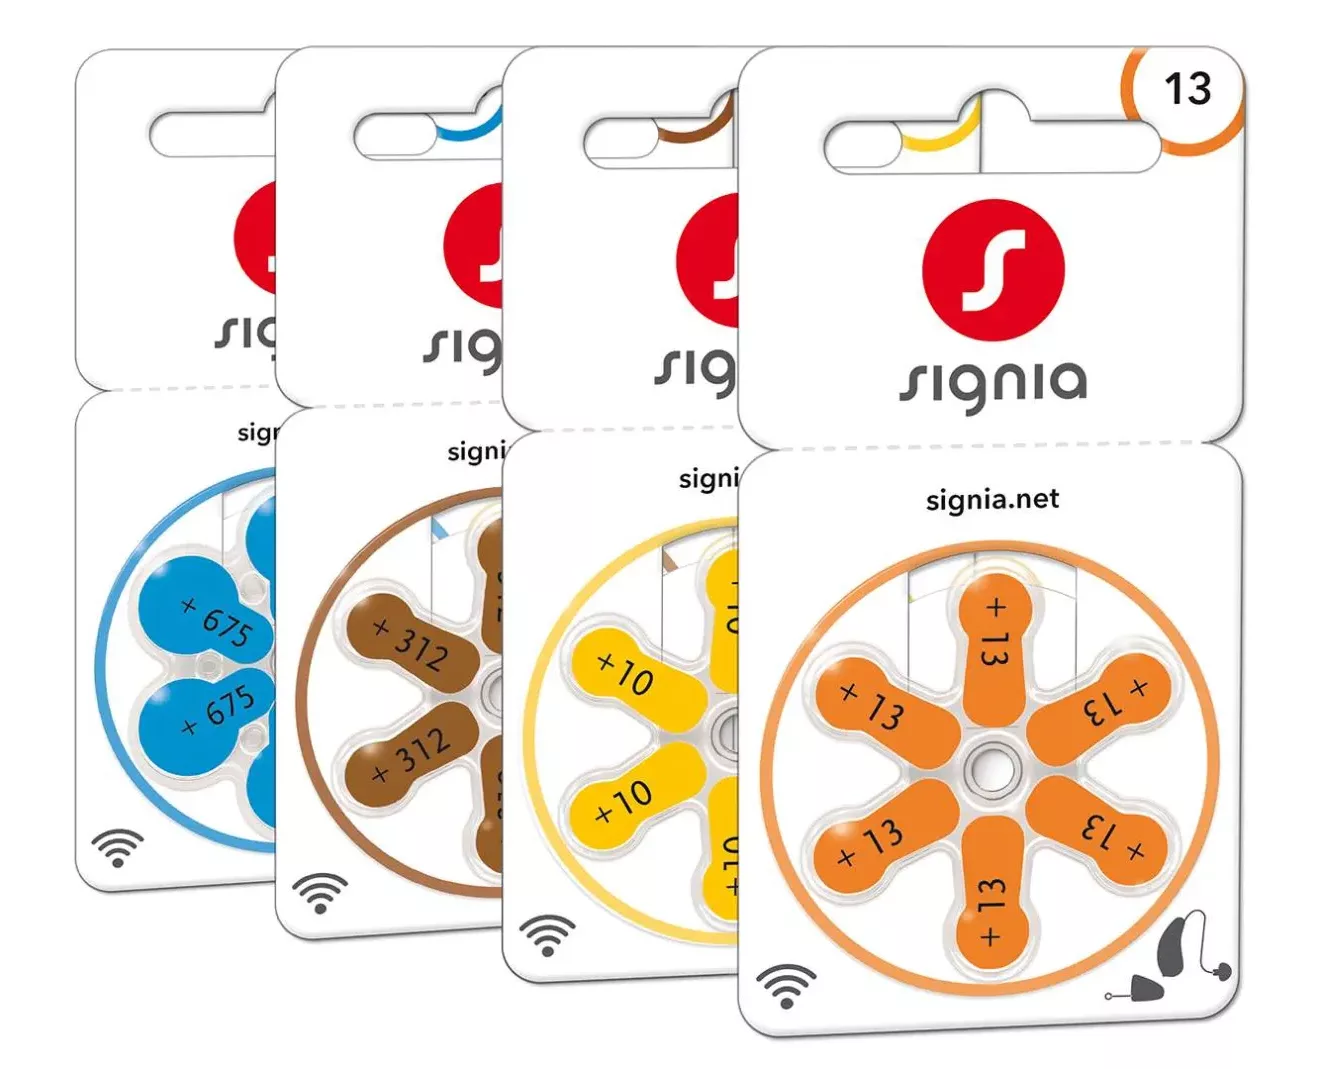 Picture of Signia hearing aid batteries; from left to right: 675 zinc-air, 312 zinc-air, 13 zinc-air, and 10 zinc-air batteries.